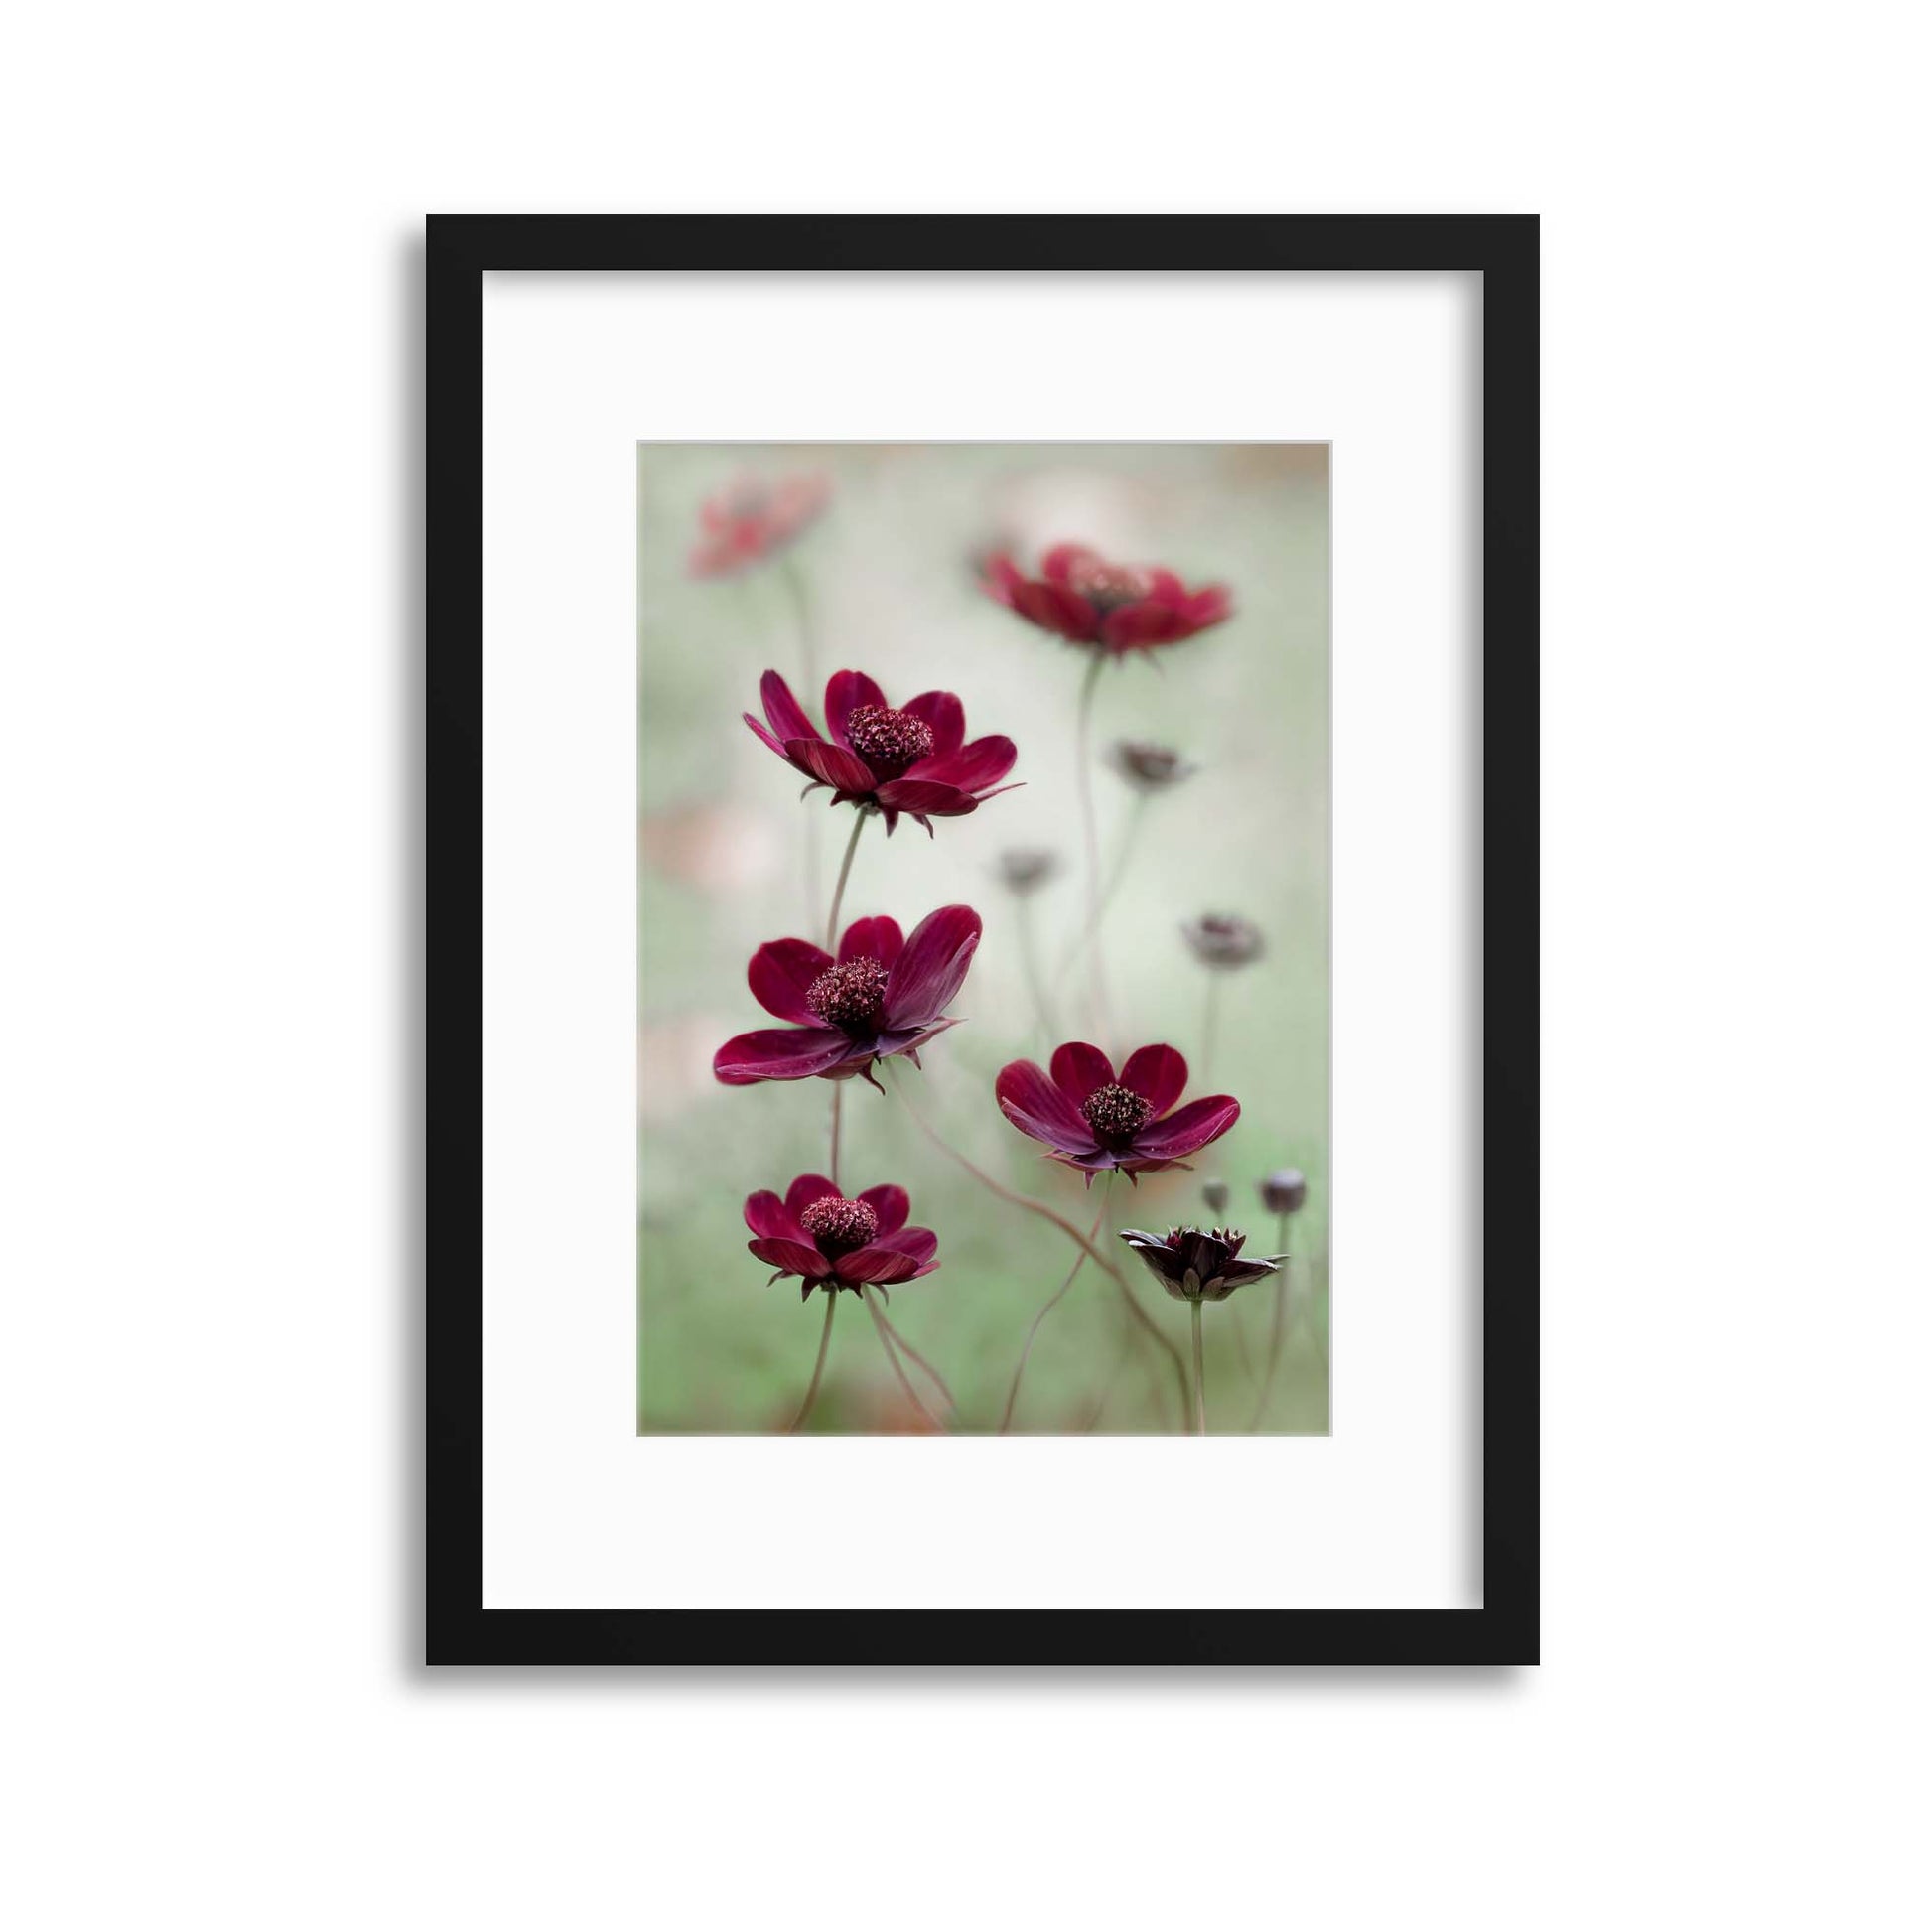 Cosmos Sway by Mandy Disher Framed Print - USTAD HOME